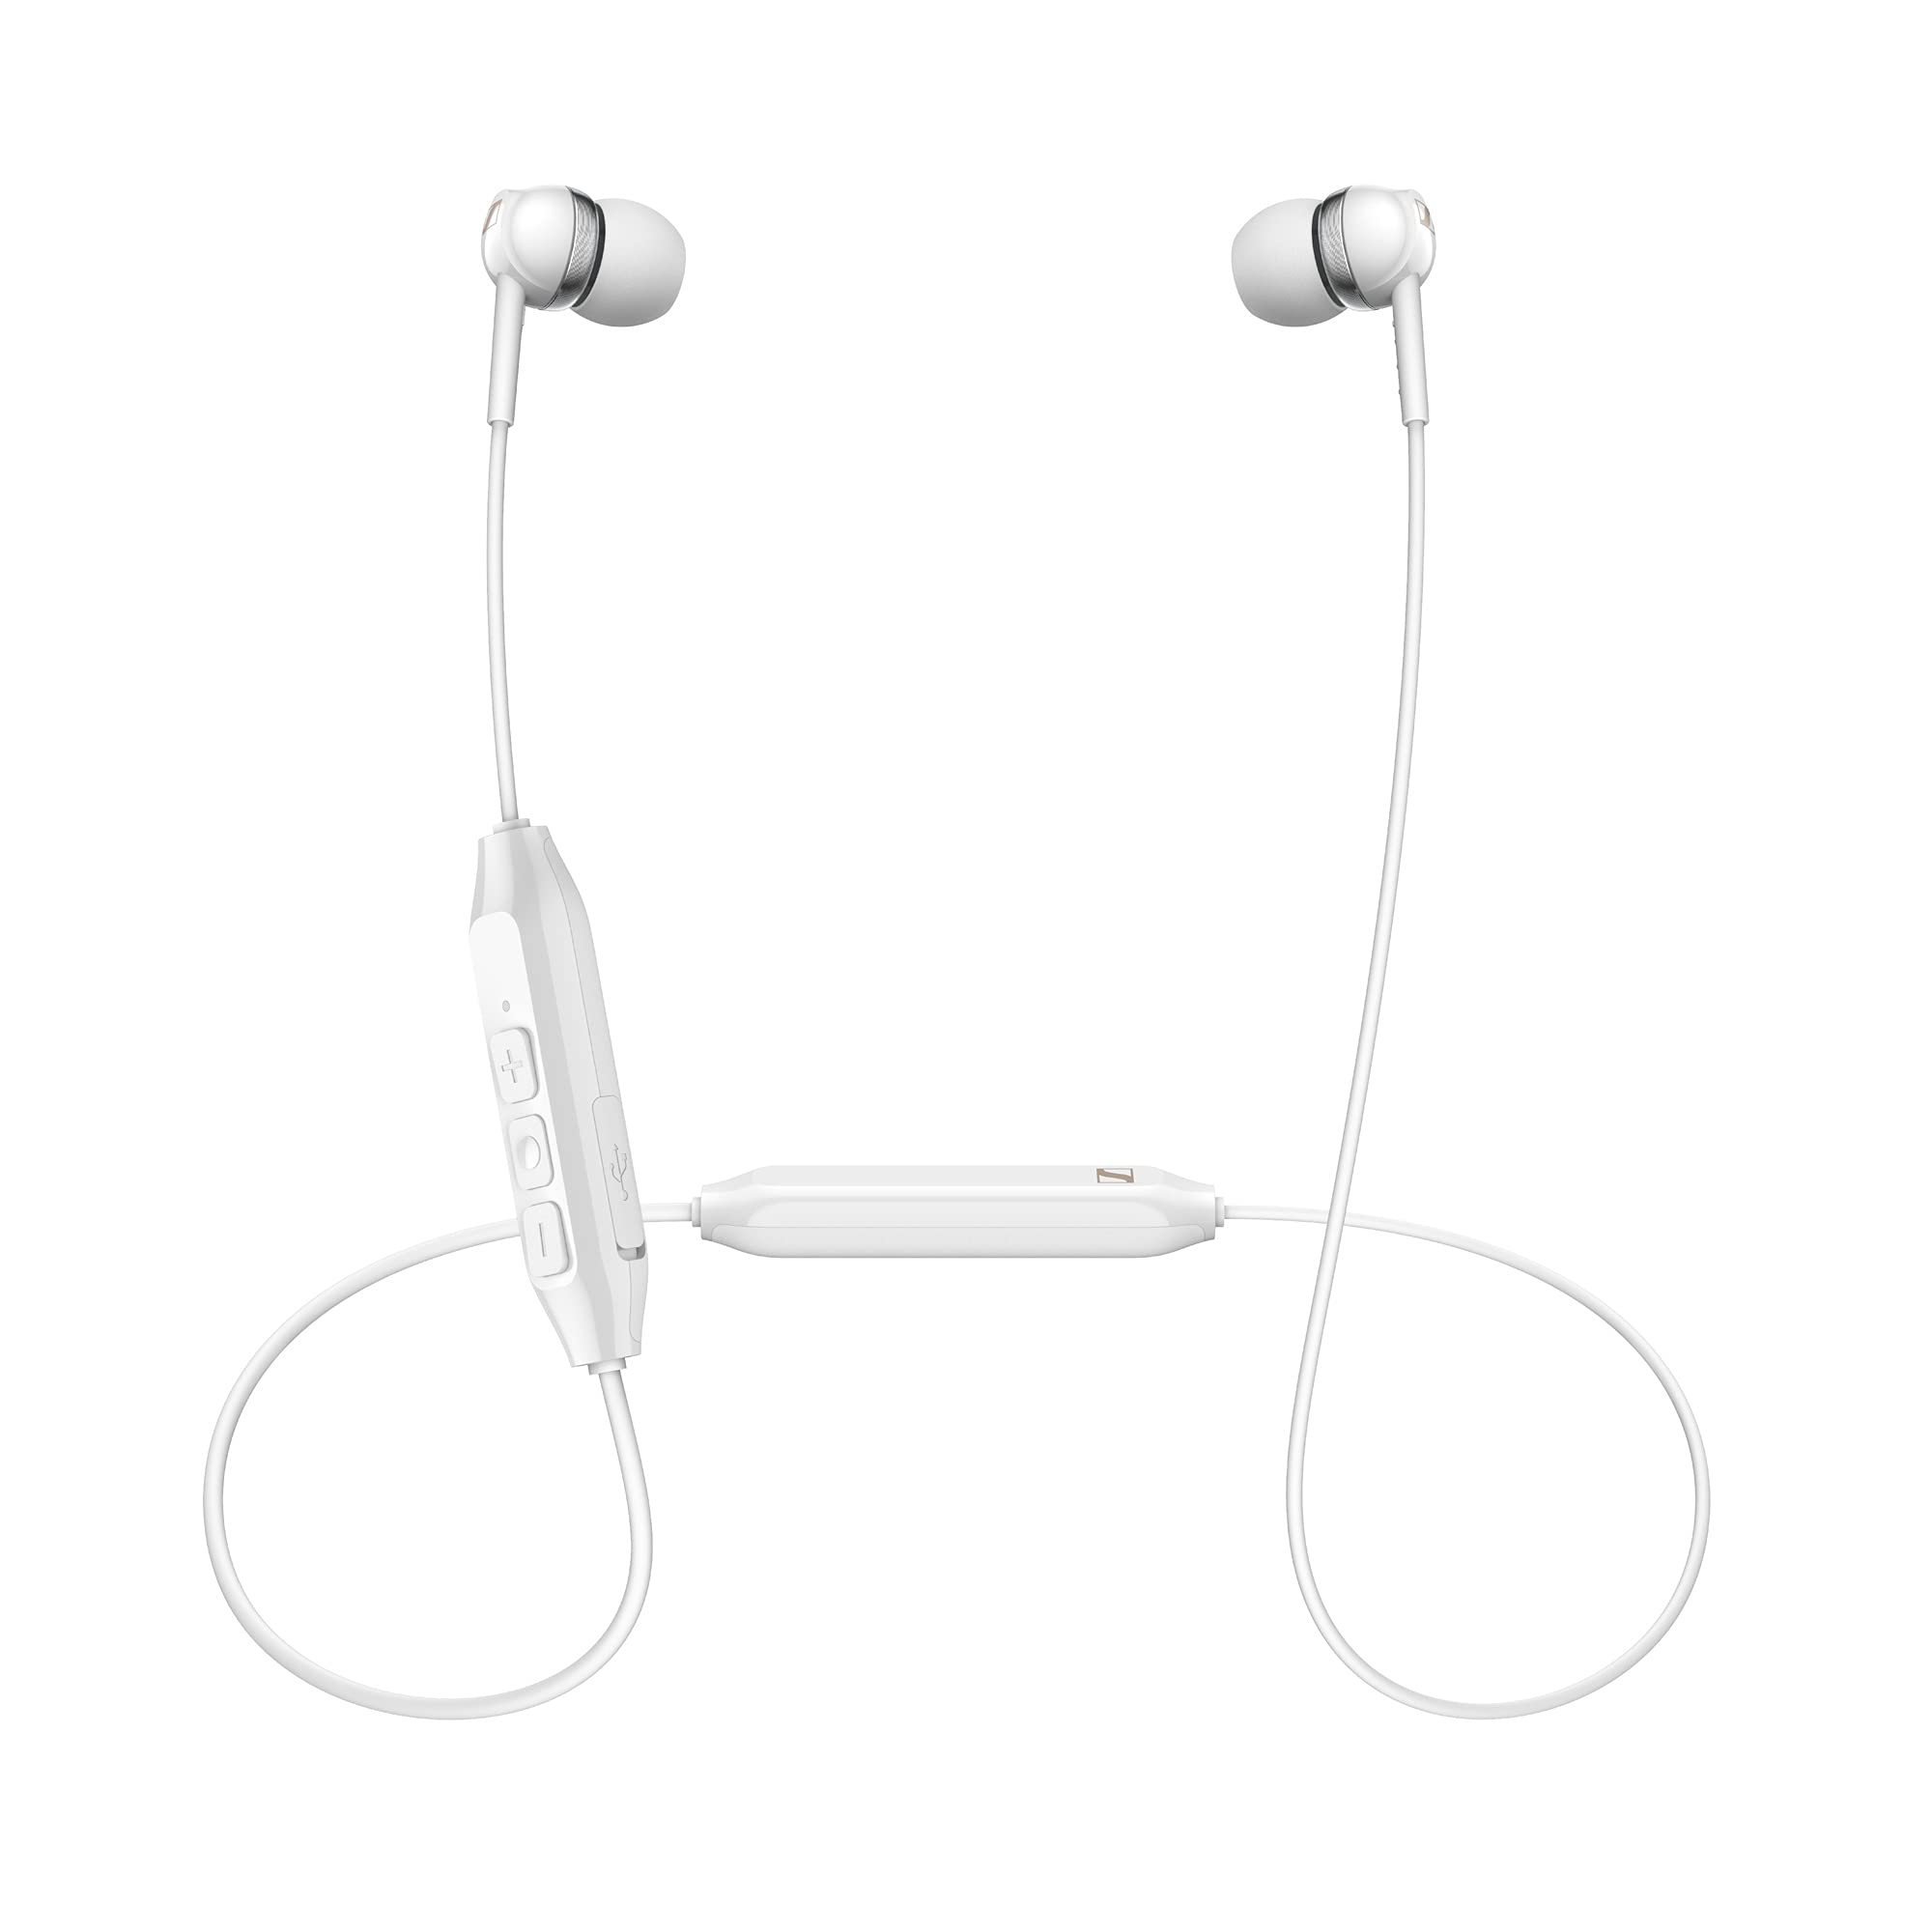 Sennheiser CX 150BT Bluetooth 5.0 Wireless Headphone - 10-hour Battery Life, USB-C Fast Charging, Two Device Connectivity - White (CX 150BT White)